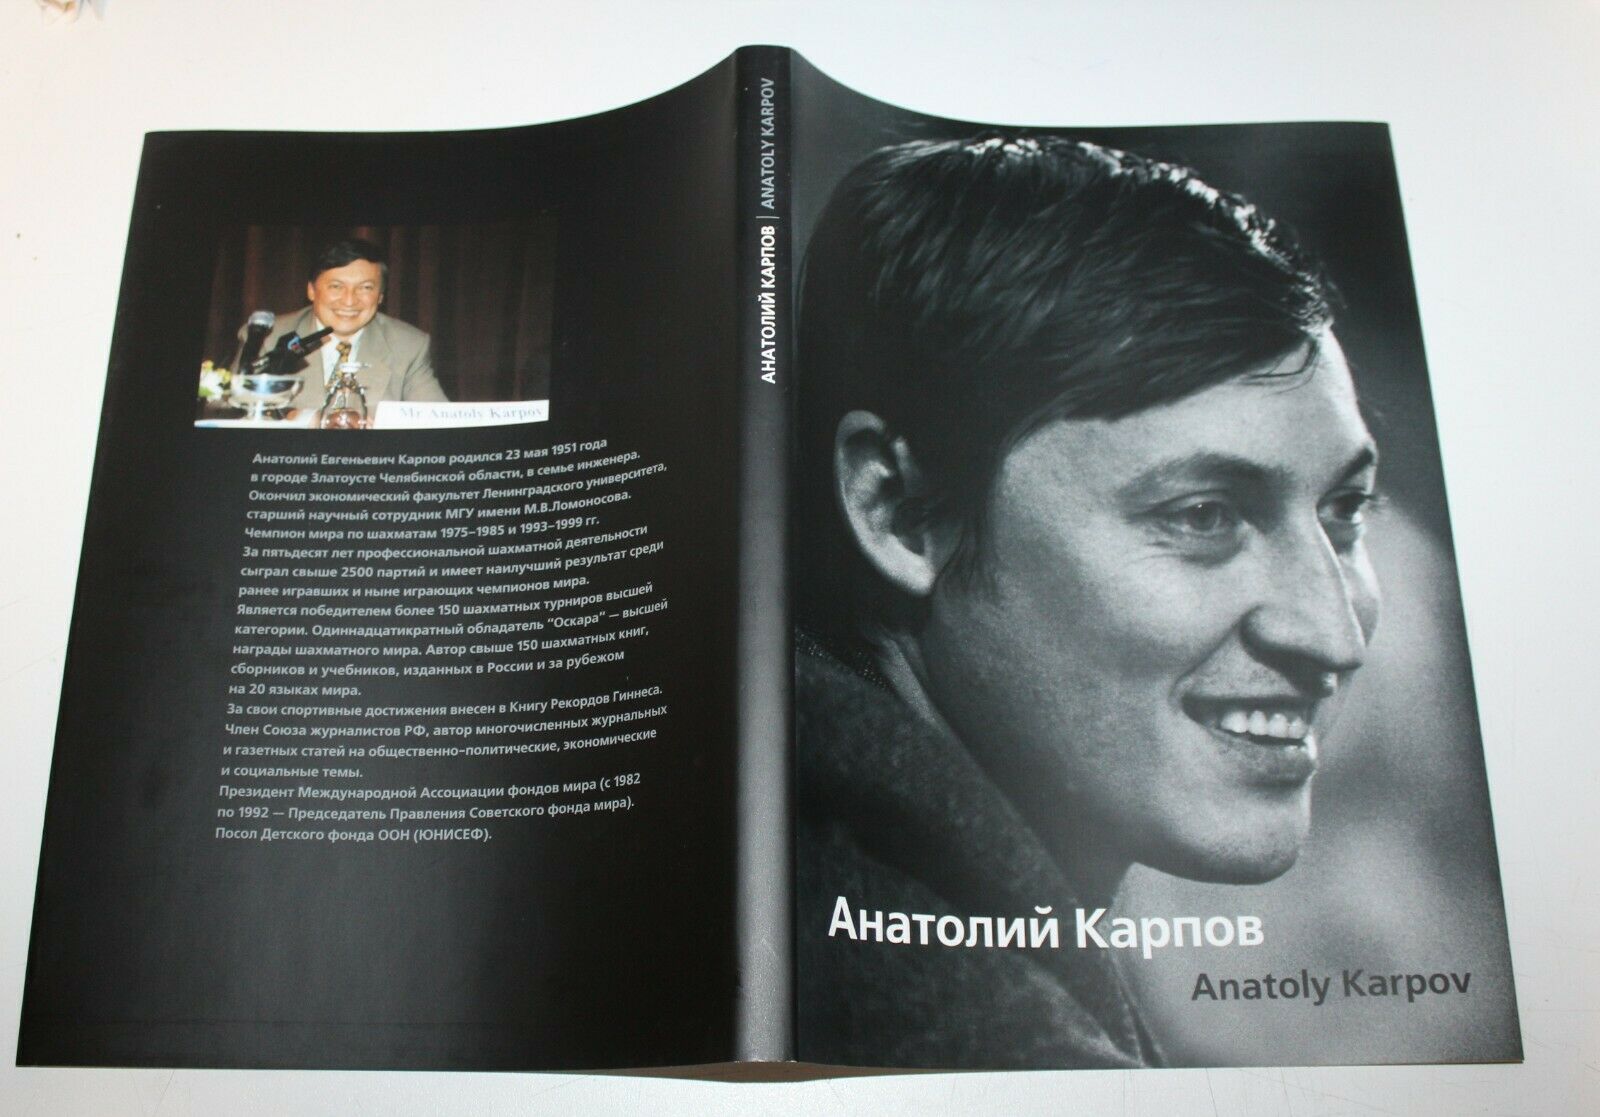 11358.Luxurious VIP Gift Album: Anatoly Karpov. Never was for sale. 2010 Soft cover